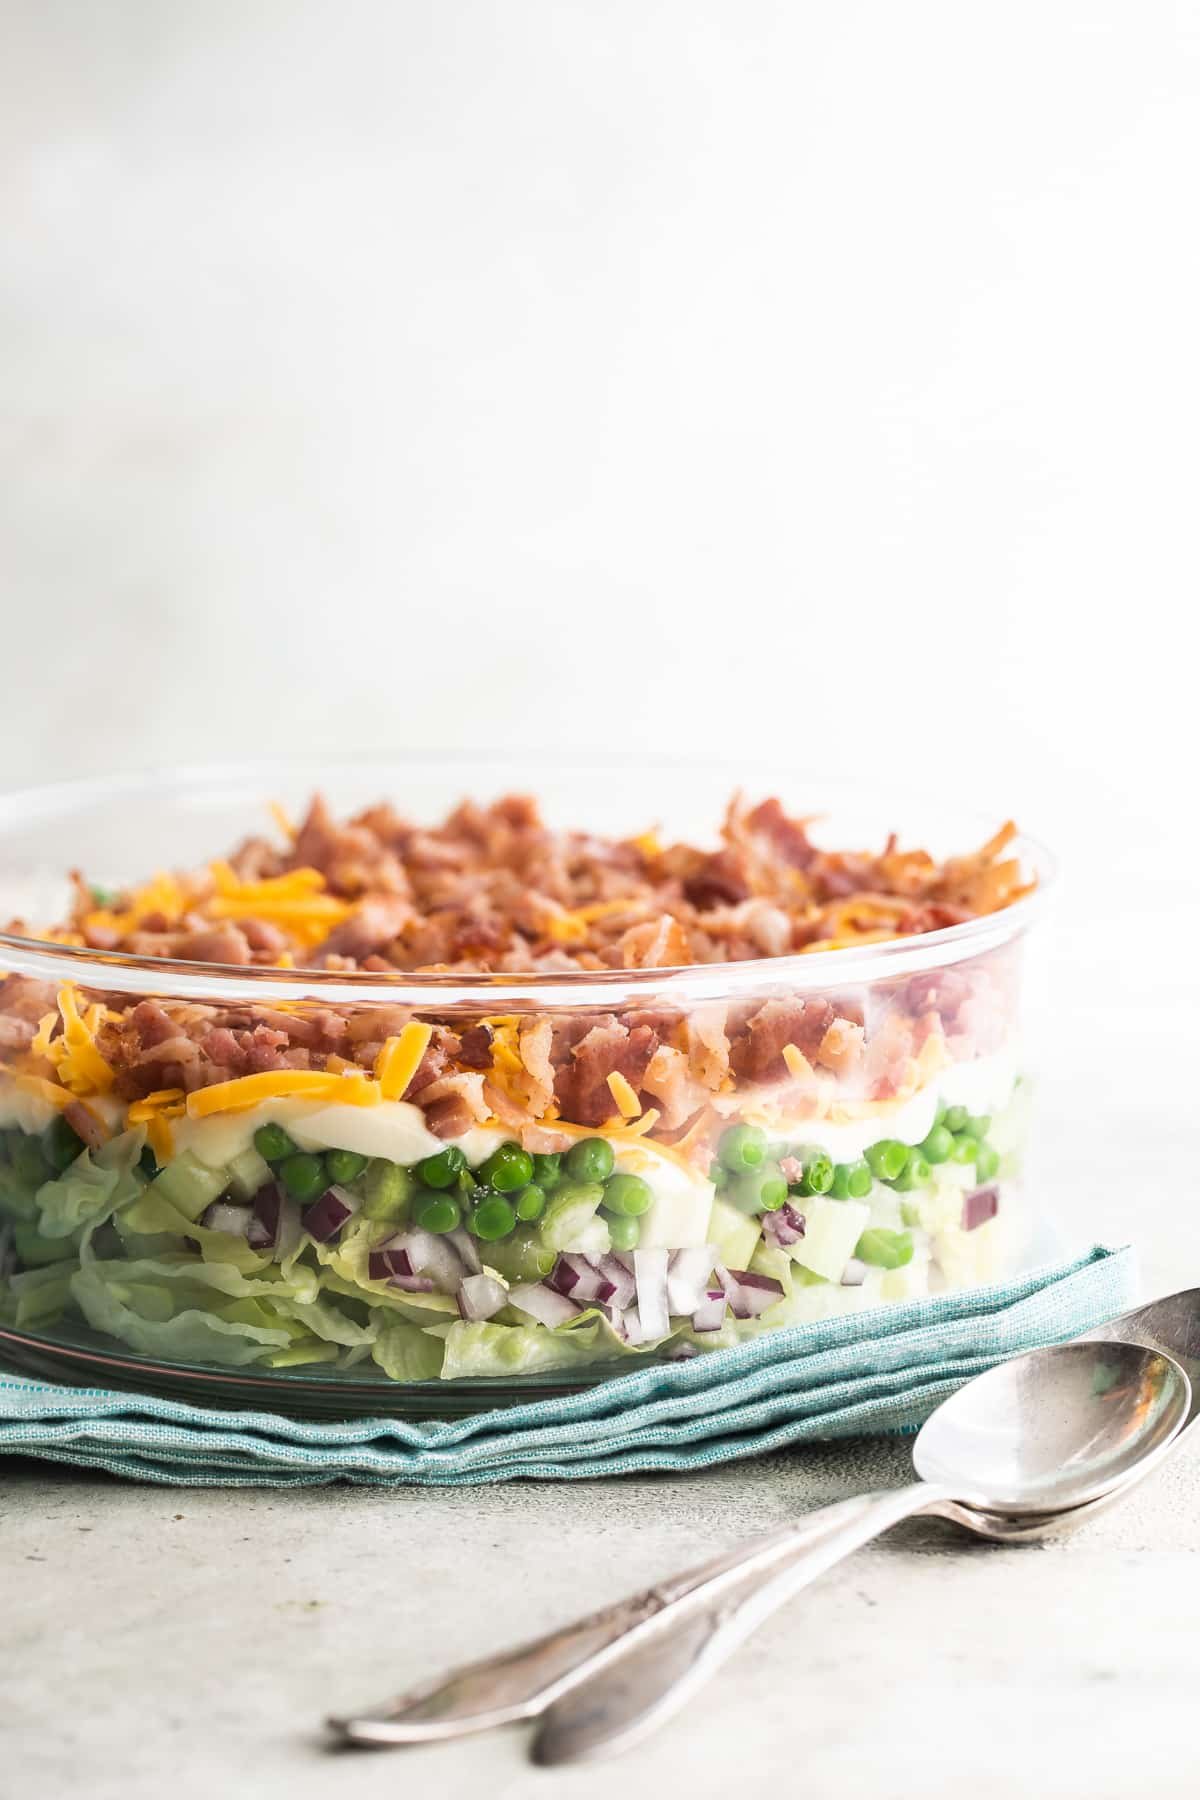 Seven layer salad in a glass dish.